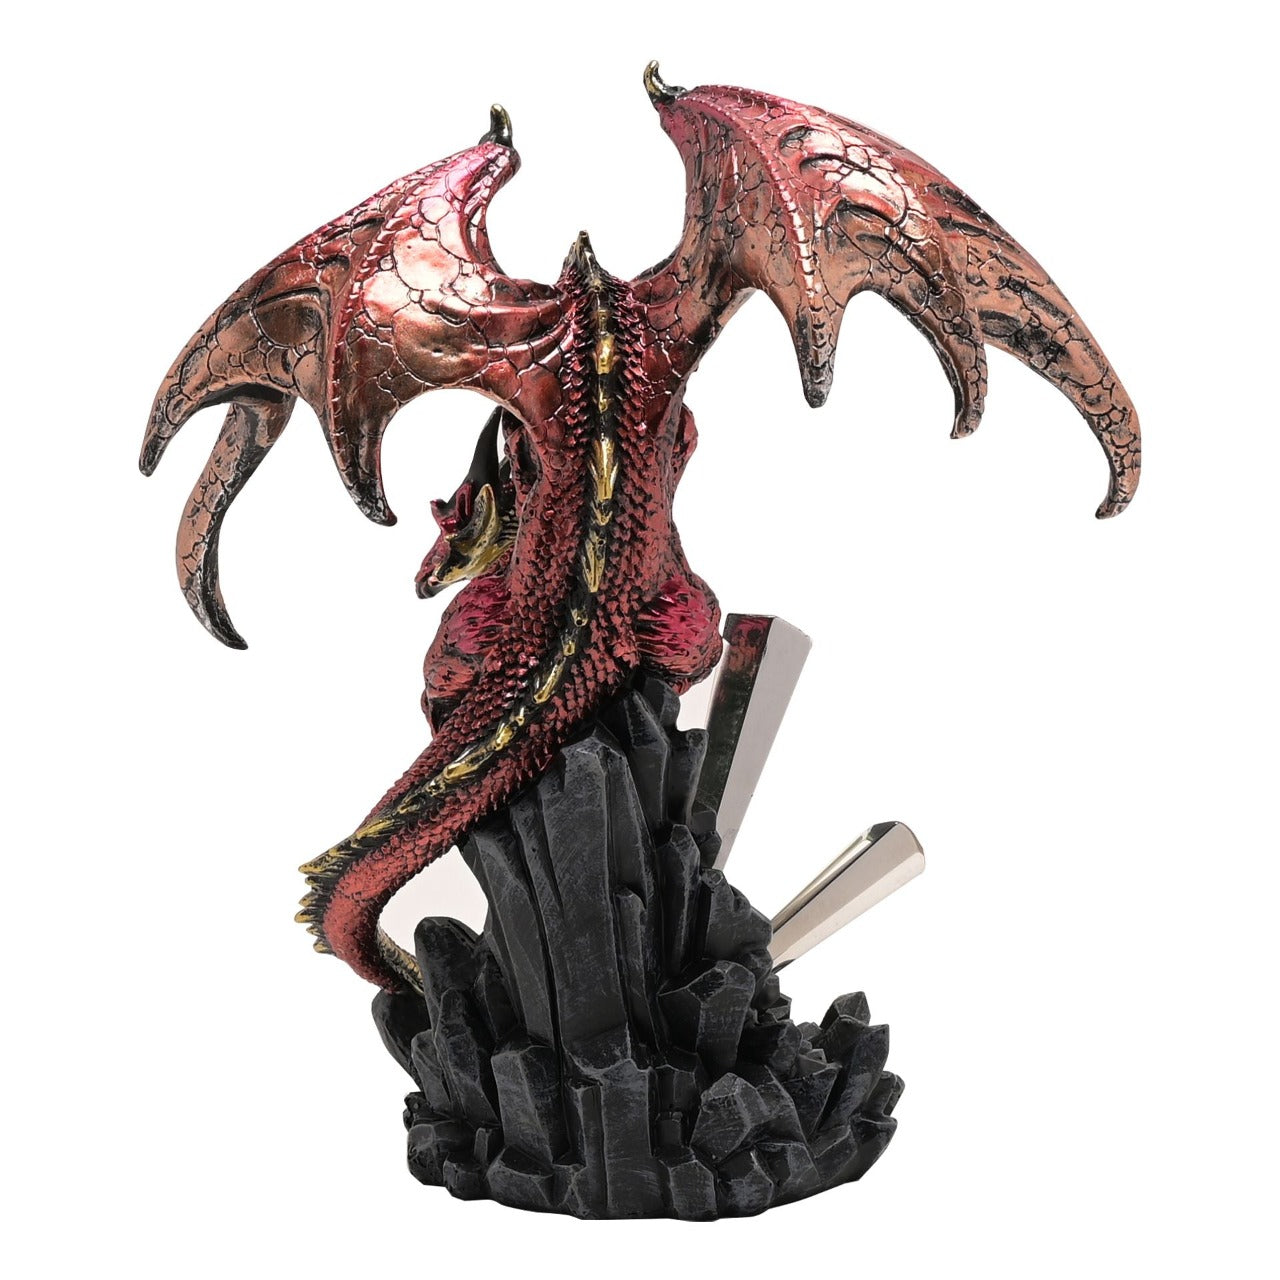 Red Dragon With Crystals Diorama Figurine  A red dragon with crystals diorama figurine by HOCUS POCUS NOVELTIES®.  This majestic figurine captures the mythical world of dragons for those obsessed with fantasy.